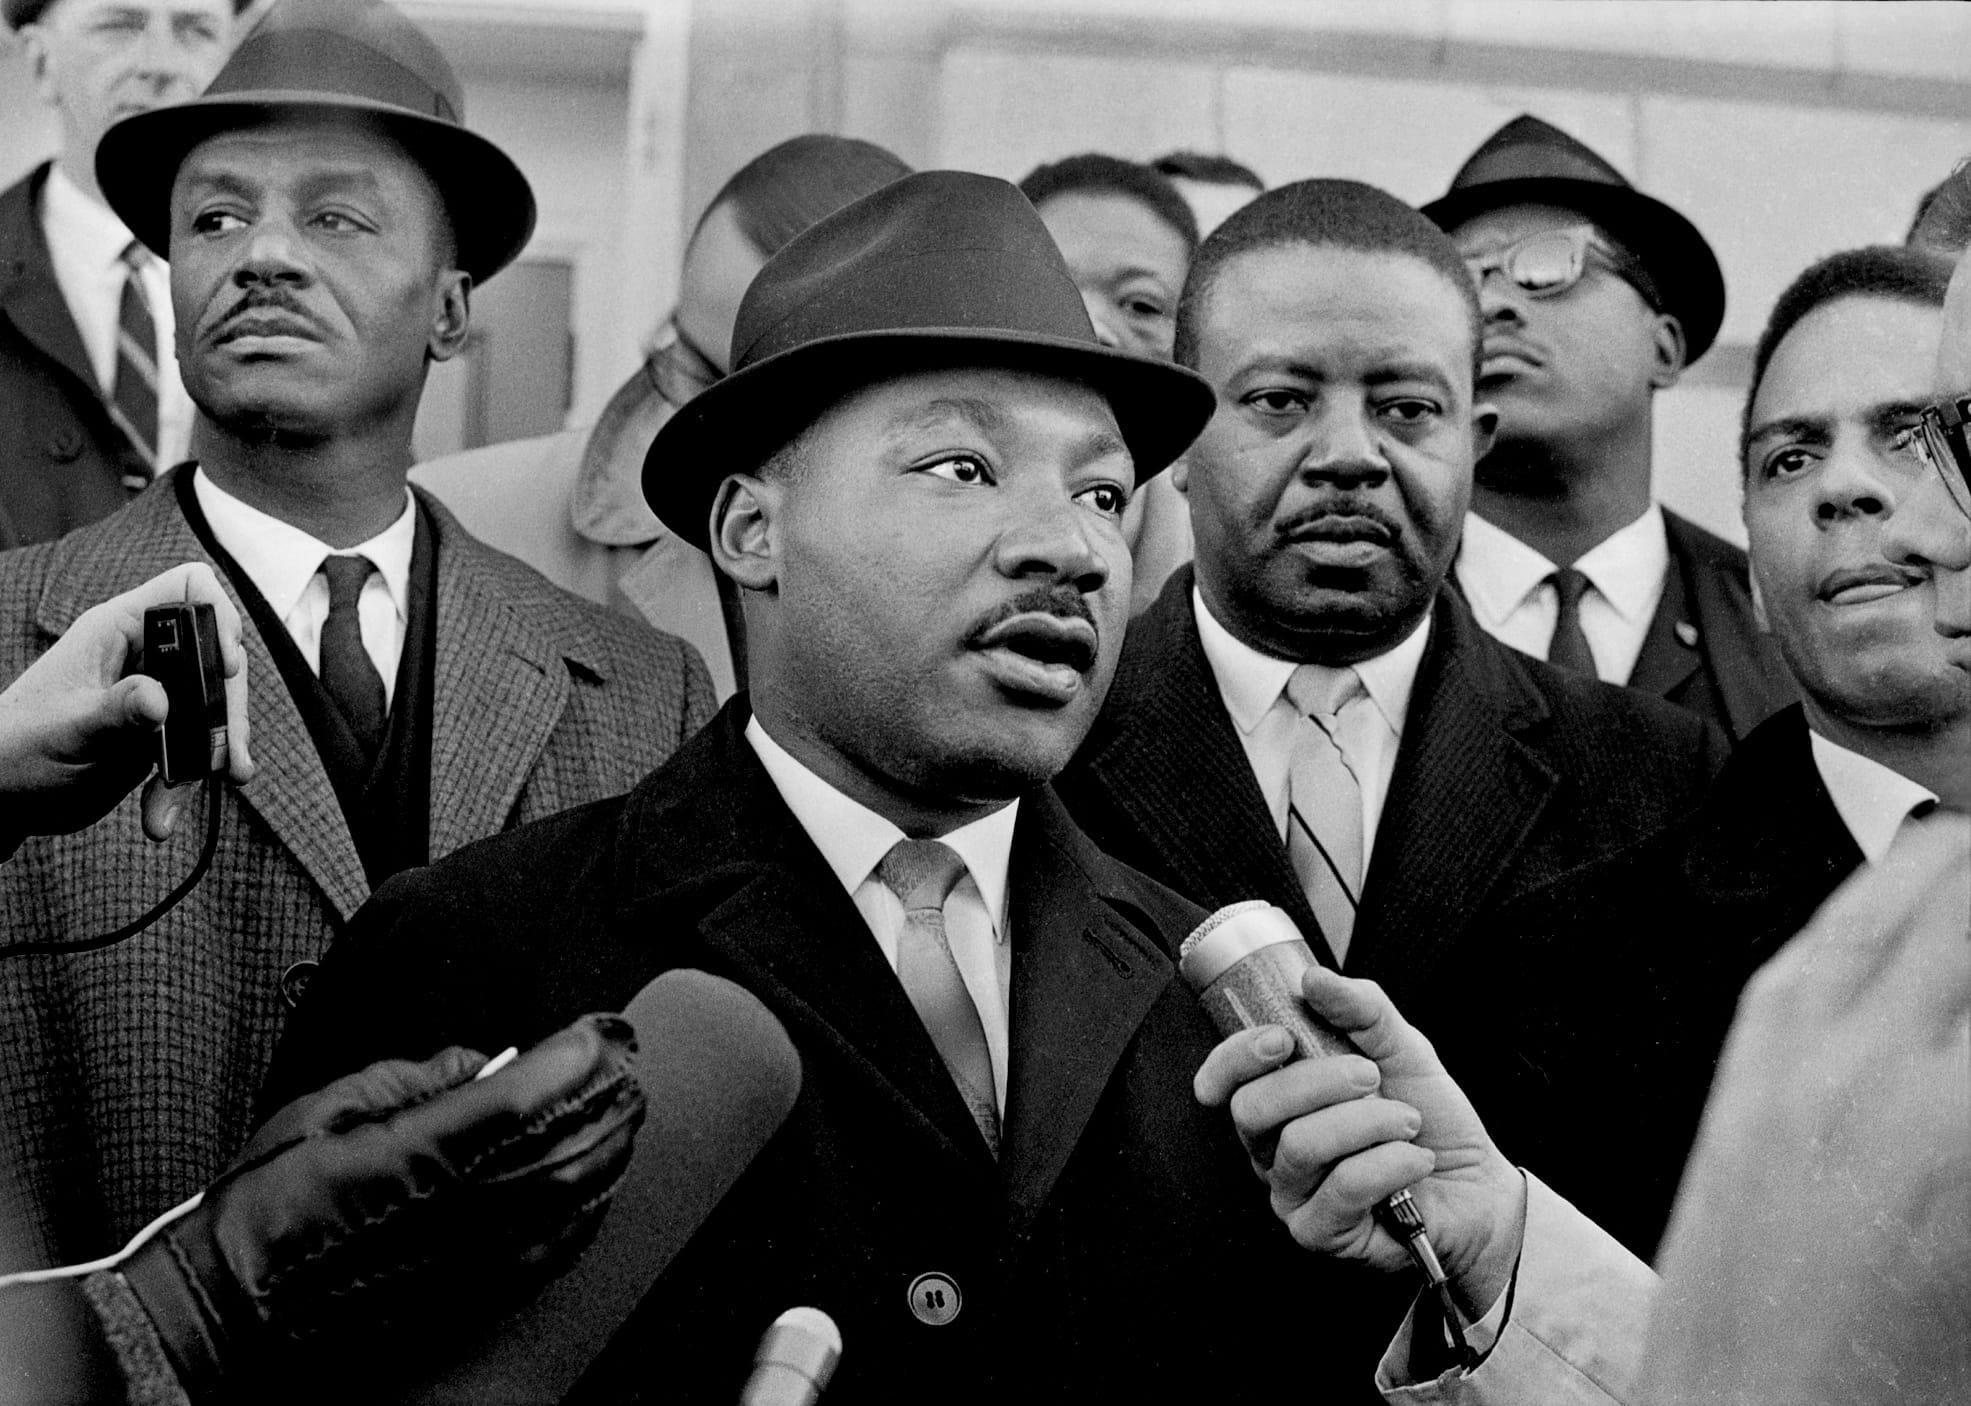 Martin Luther King, Jr., Biography, Speeches, Facts, & Assassination